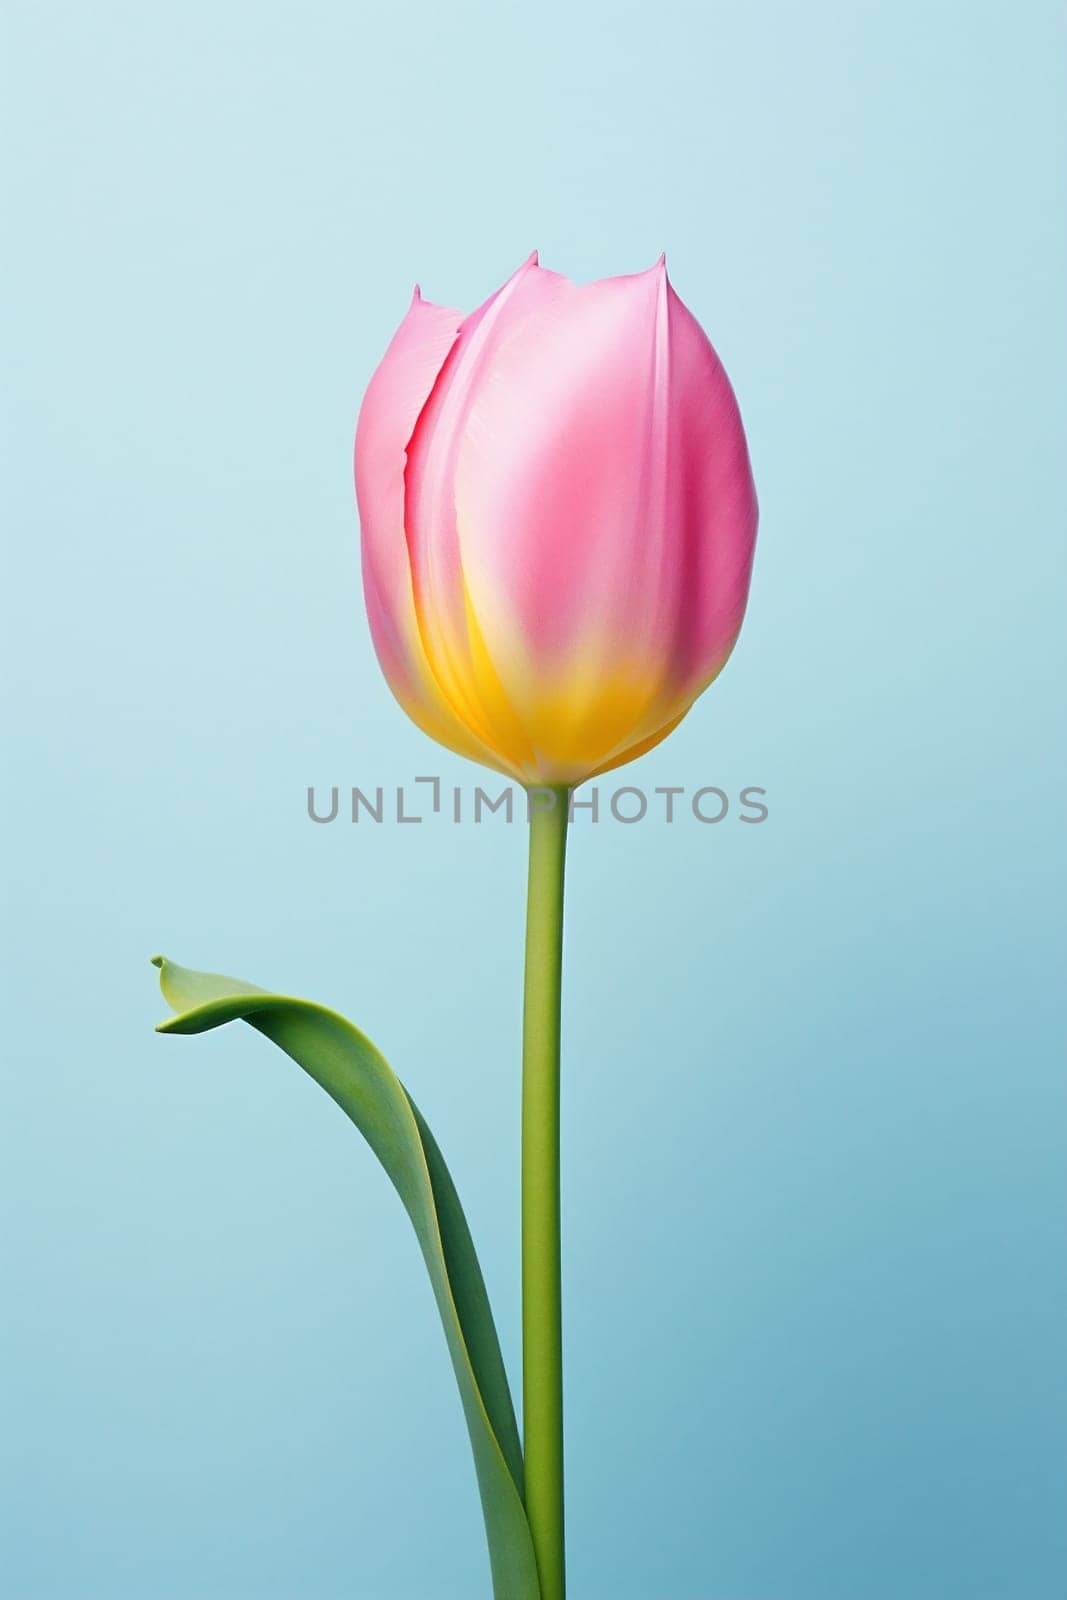 Bloom beauty red love nature floral background romantic flower blossoming season closeup flora yellow spring pink fresh garden green summer plant tulip